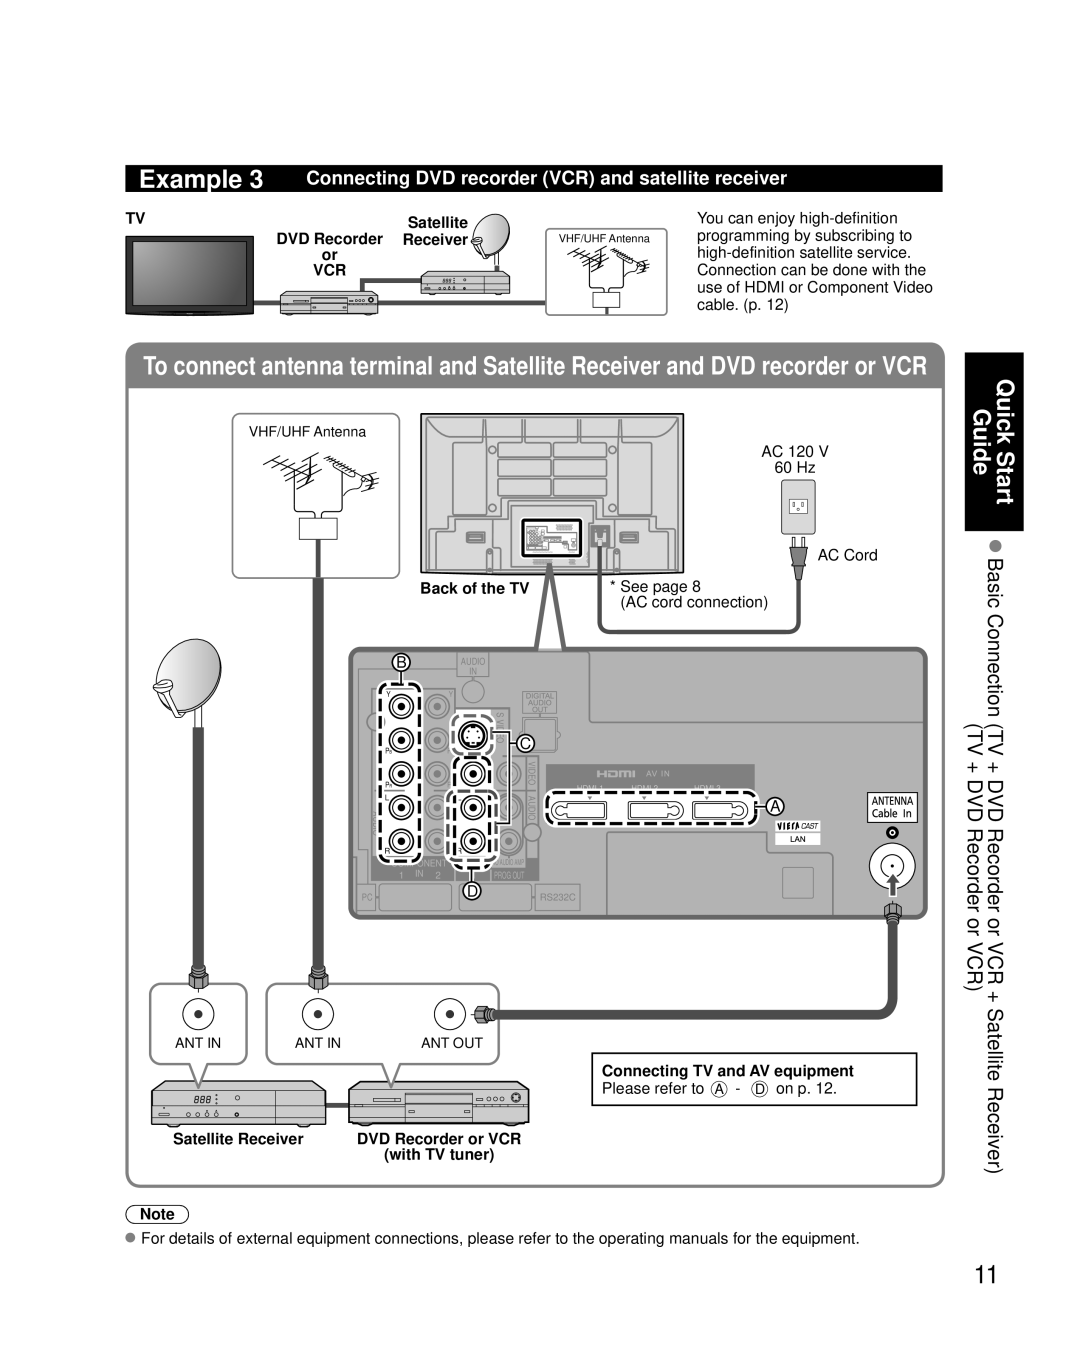 Panasonic TH 65PZ850U QuickGuideStart Basic Connection, or VCR + Satellite Receiver or VCR, DVD Recorder Receiver, Example 